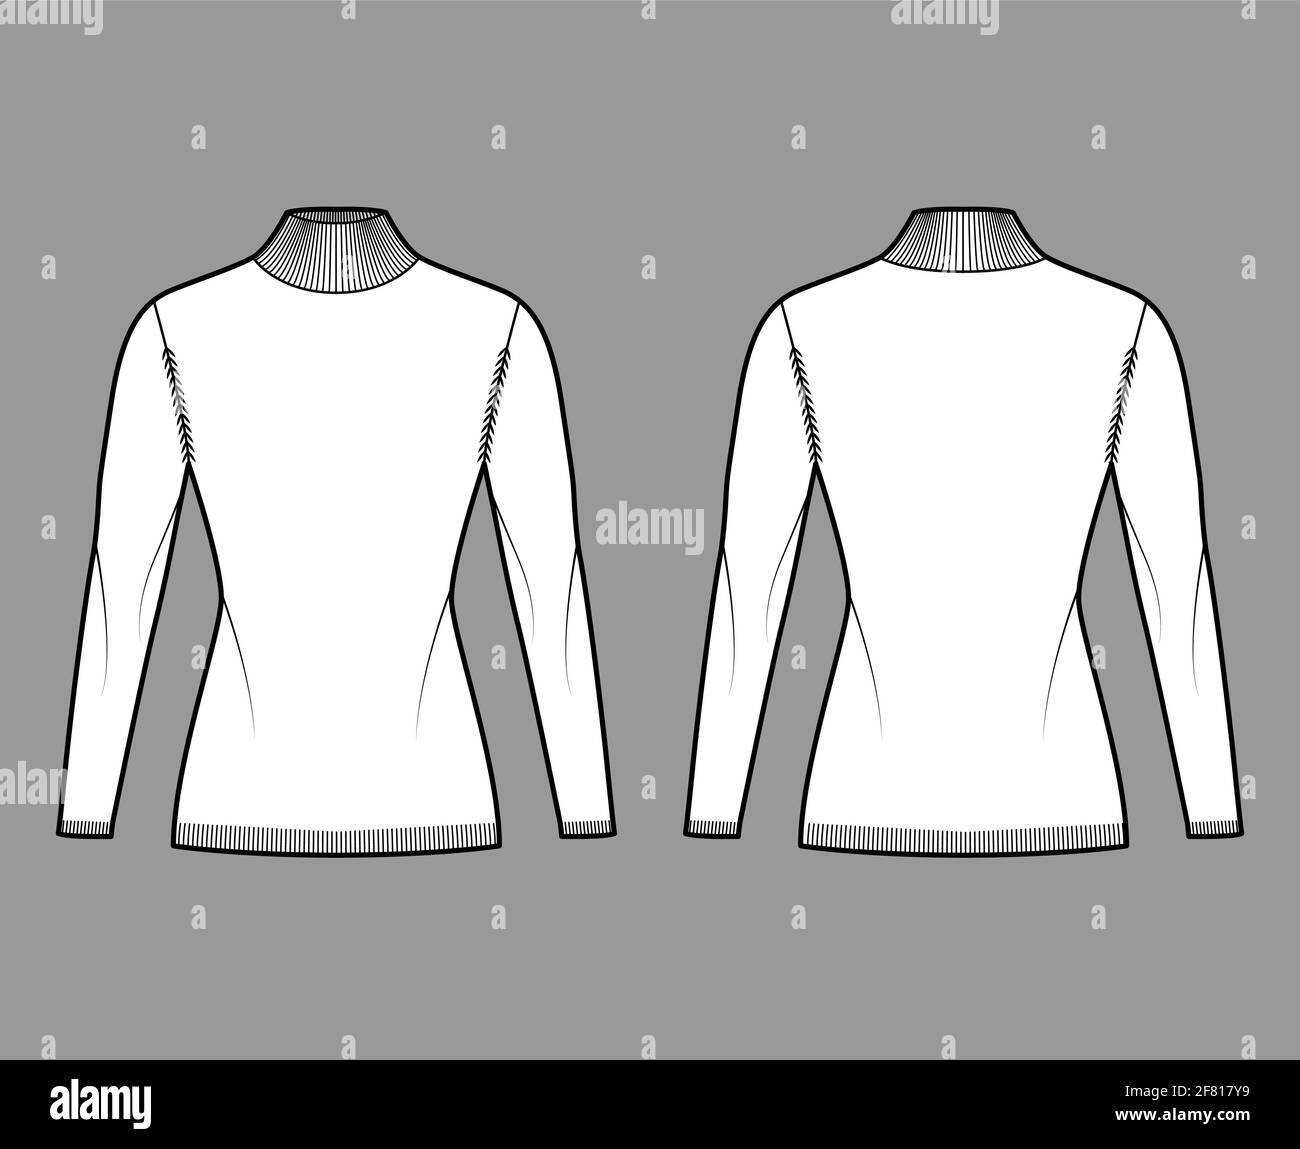 Turtleneck Sweater Vector Images (over 1,400)